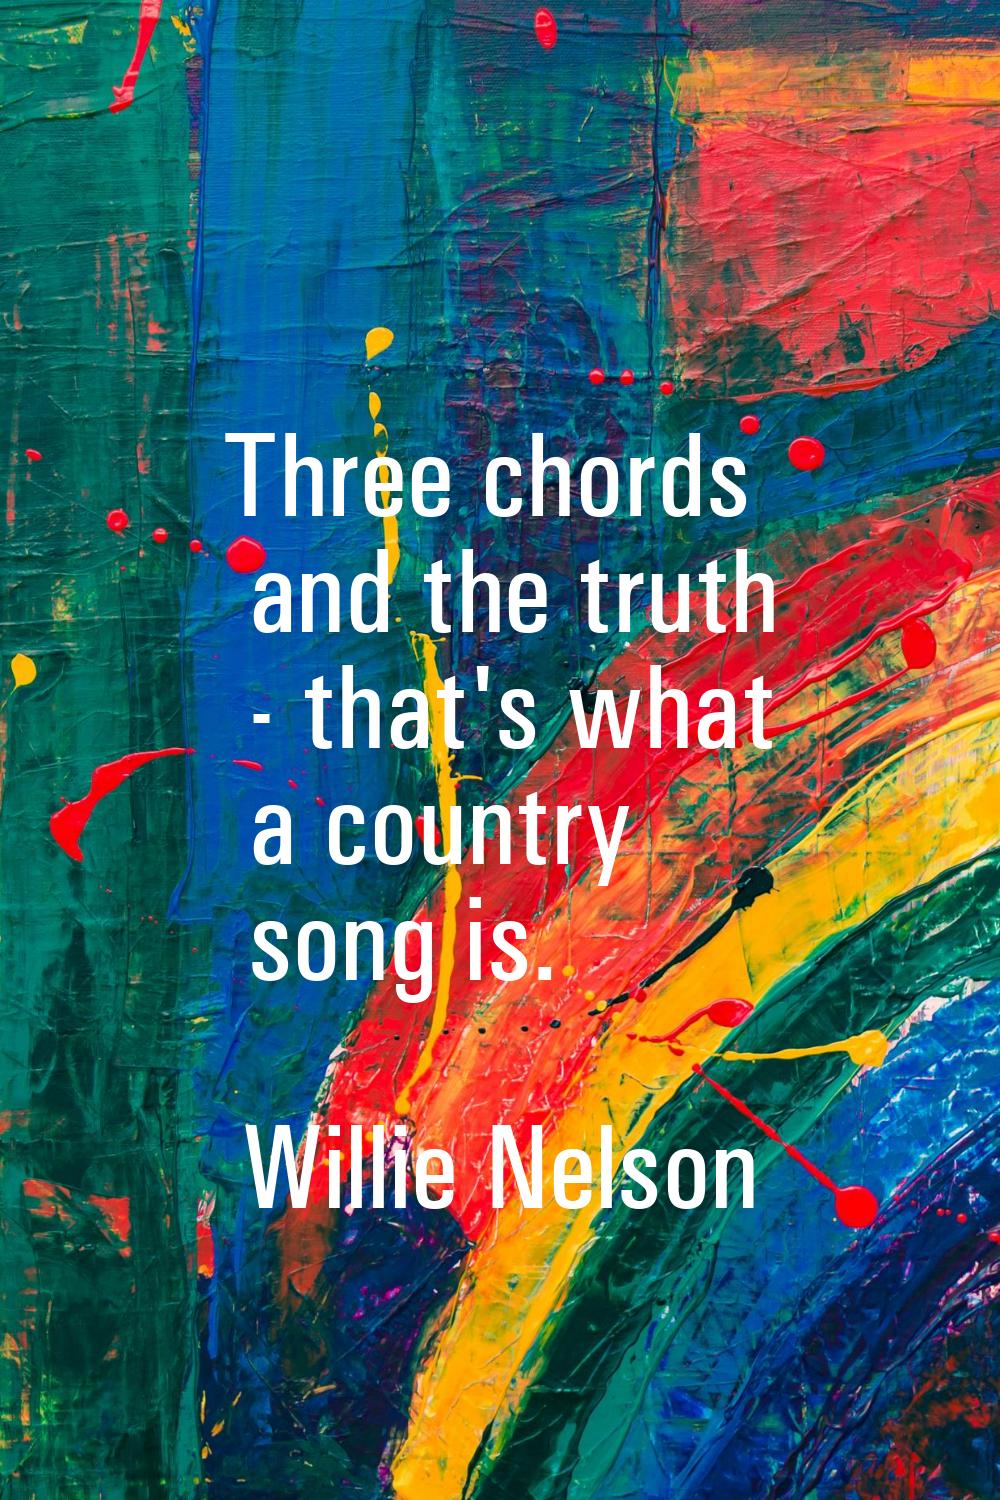 Three chords and the truth - that's what a country song is.